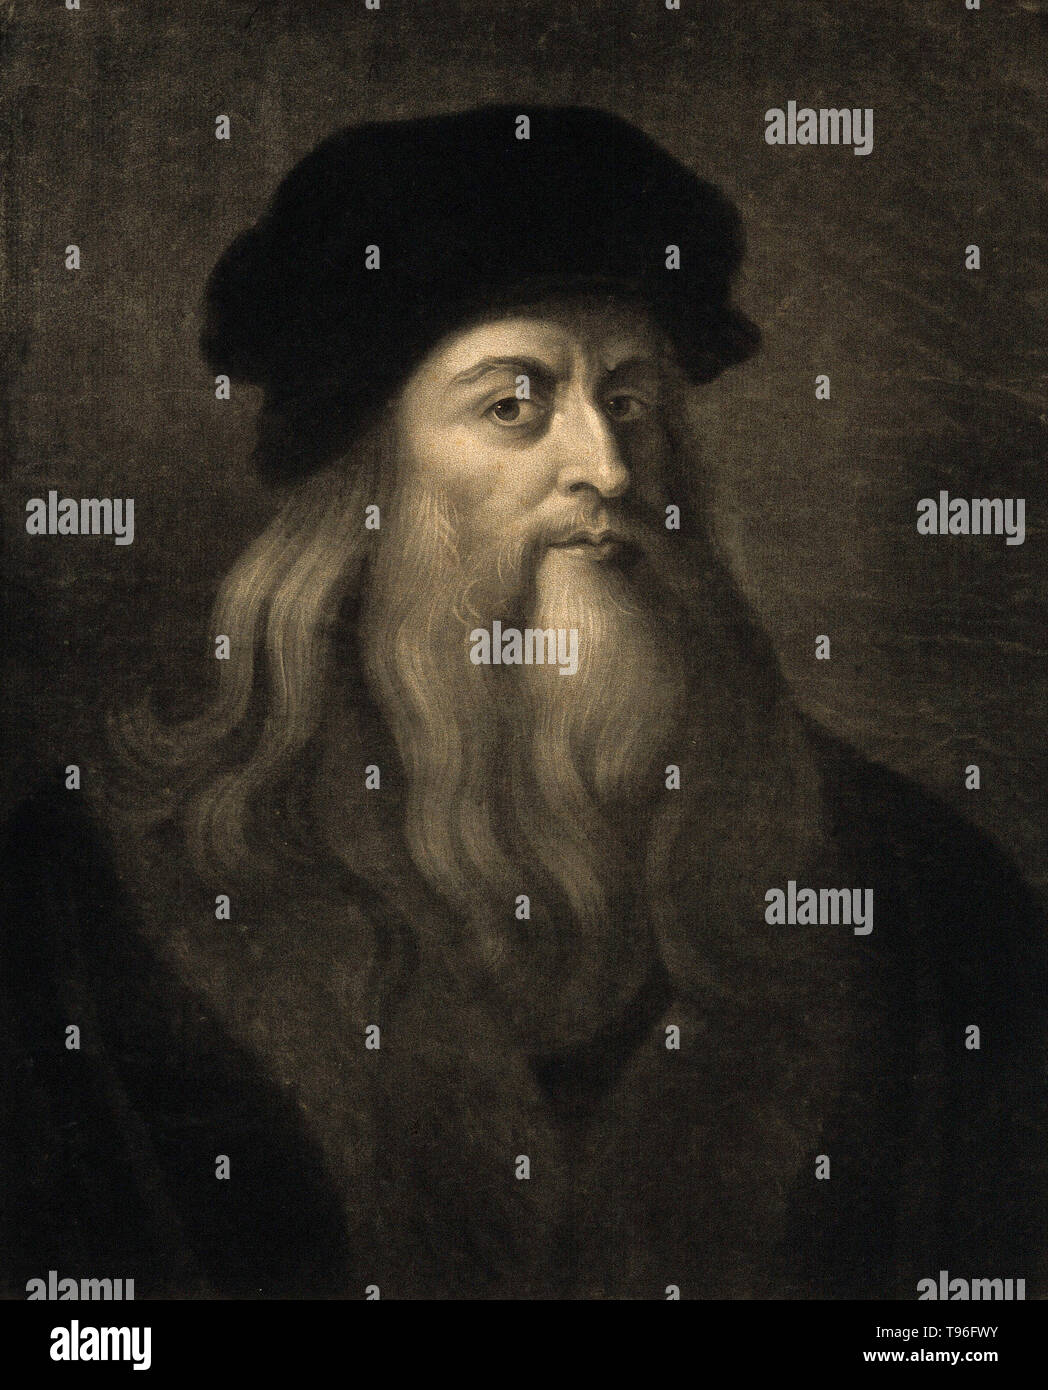 Leonardo di ser Piero da Vinci (April 15, 1452 - May 2, 1519) was an Italian Renaissance polymath: painter, sculptor, architect, musician, mathematician, engineer, inventor, anatomist, geologist, cartographer, botanist, and writer. His genius, perhaps more than that of any other figure, epitomized the Renaissance humanist ideal, often been described as the archetype of the Renaissance Man. Mezzotint by C. Townley, 1777, after himself. Stock Photo